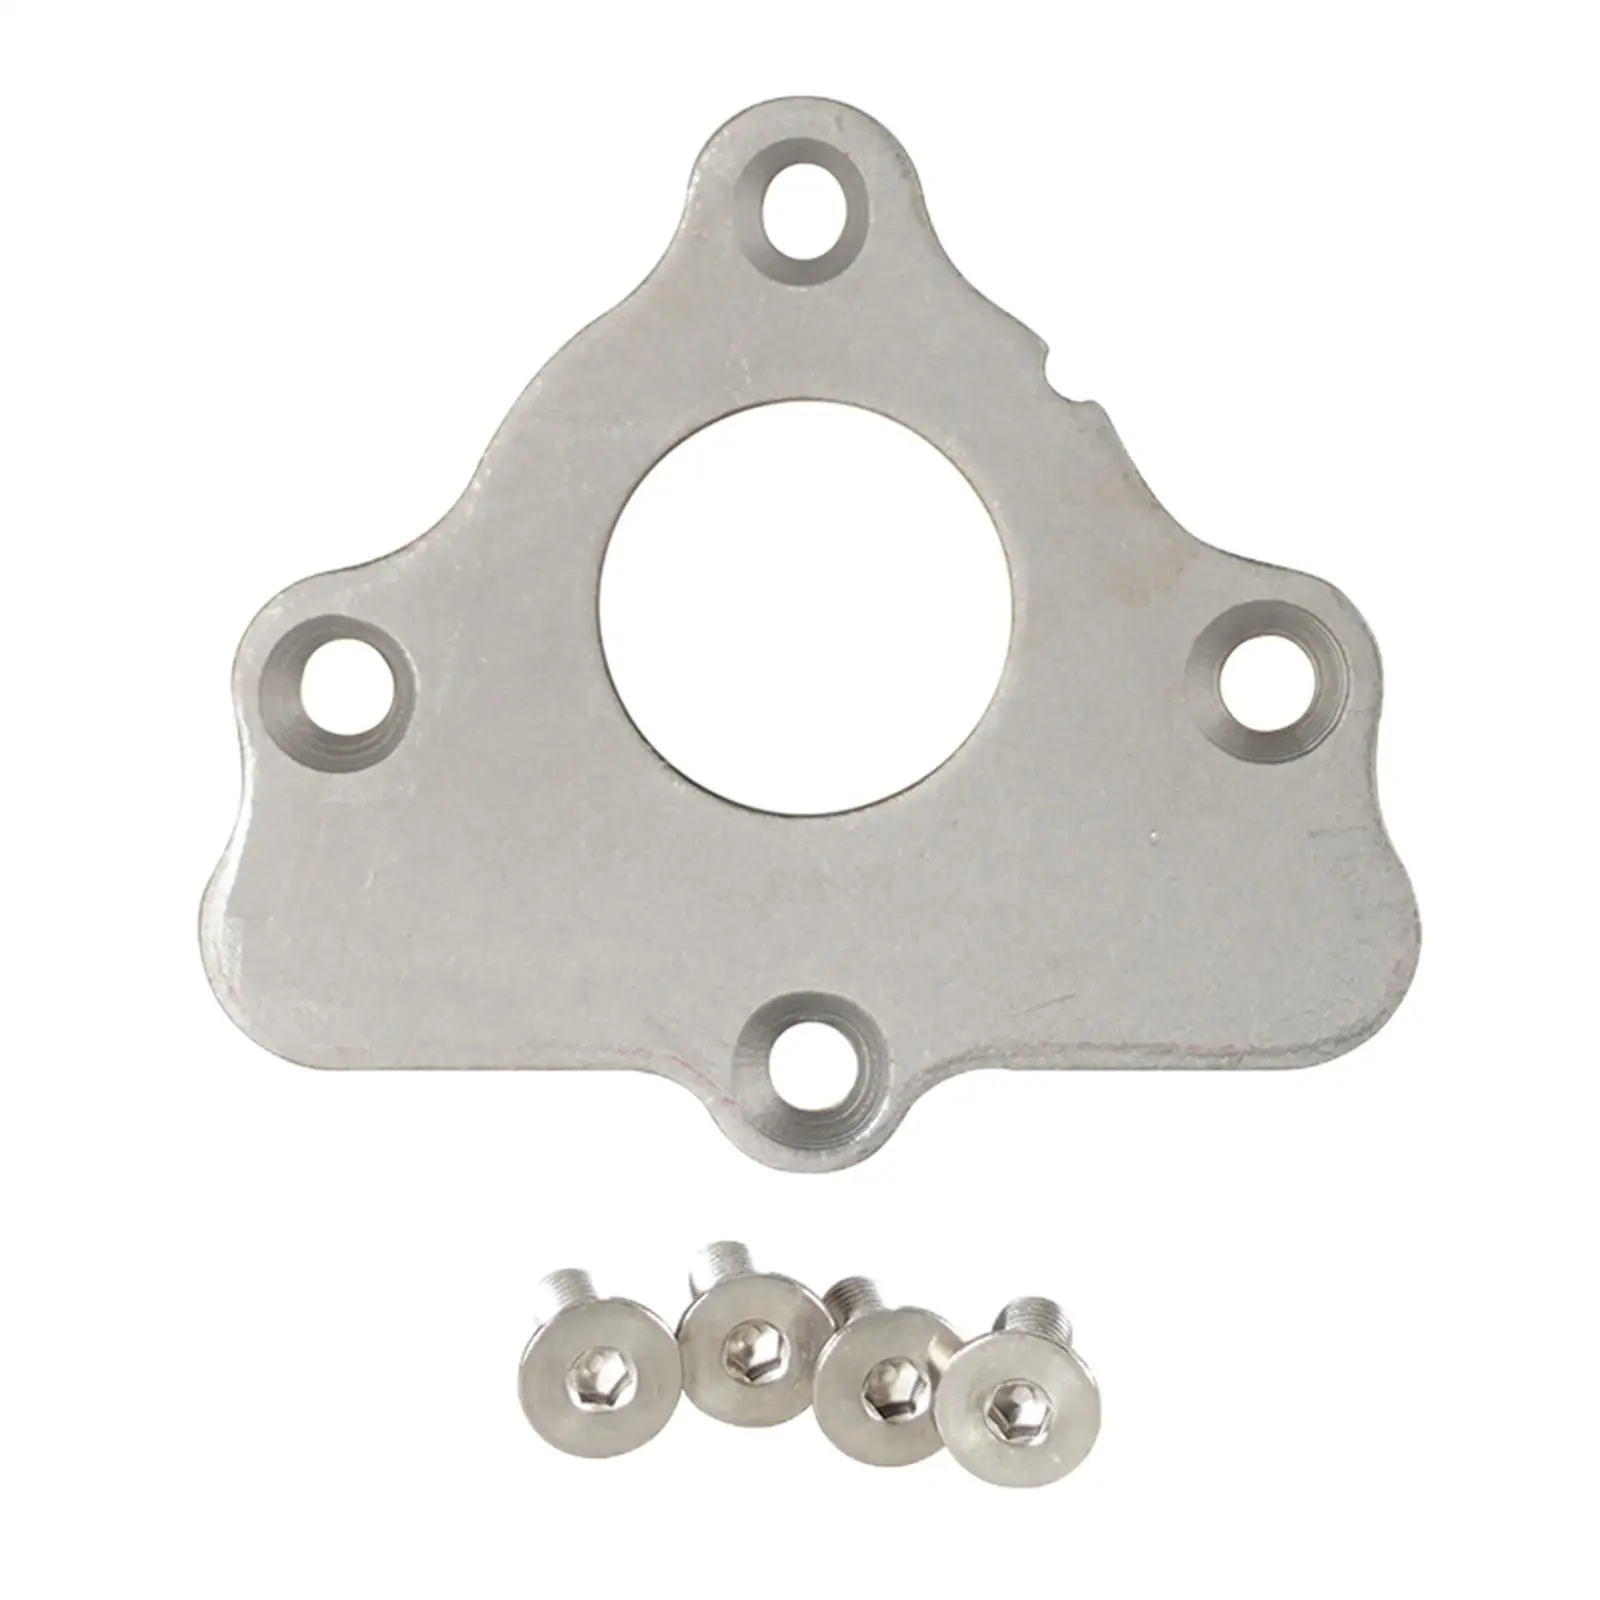 Camshaft Thrust Retainer Plate Fits for LS Series Engines High Performance